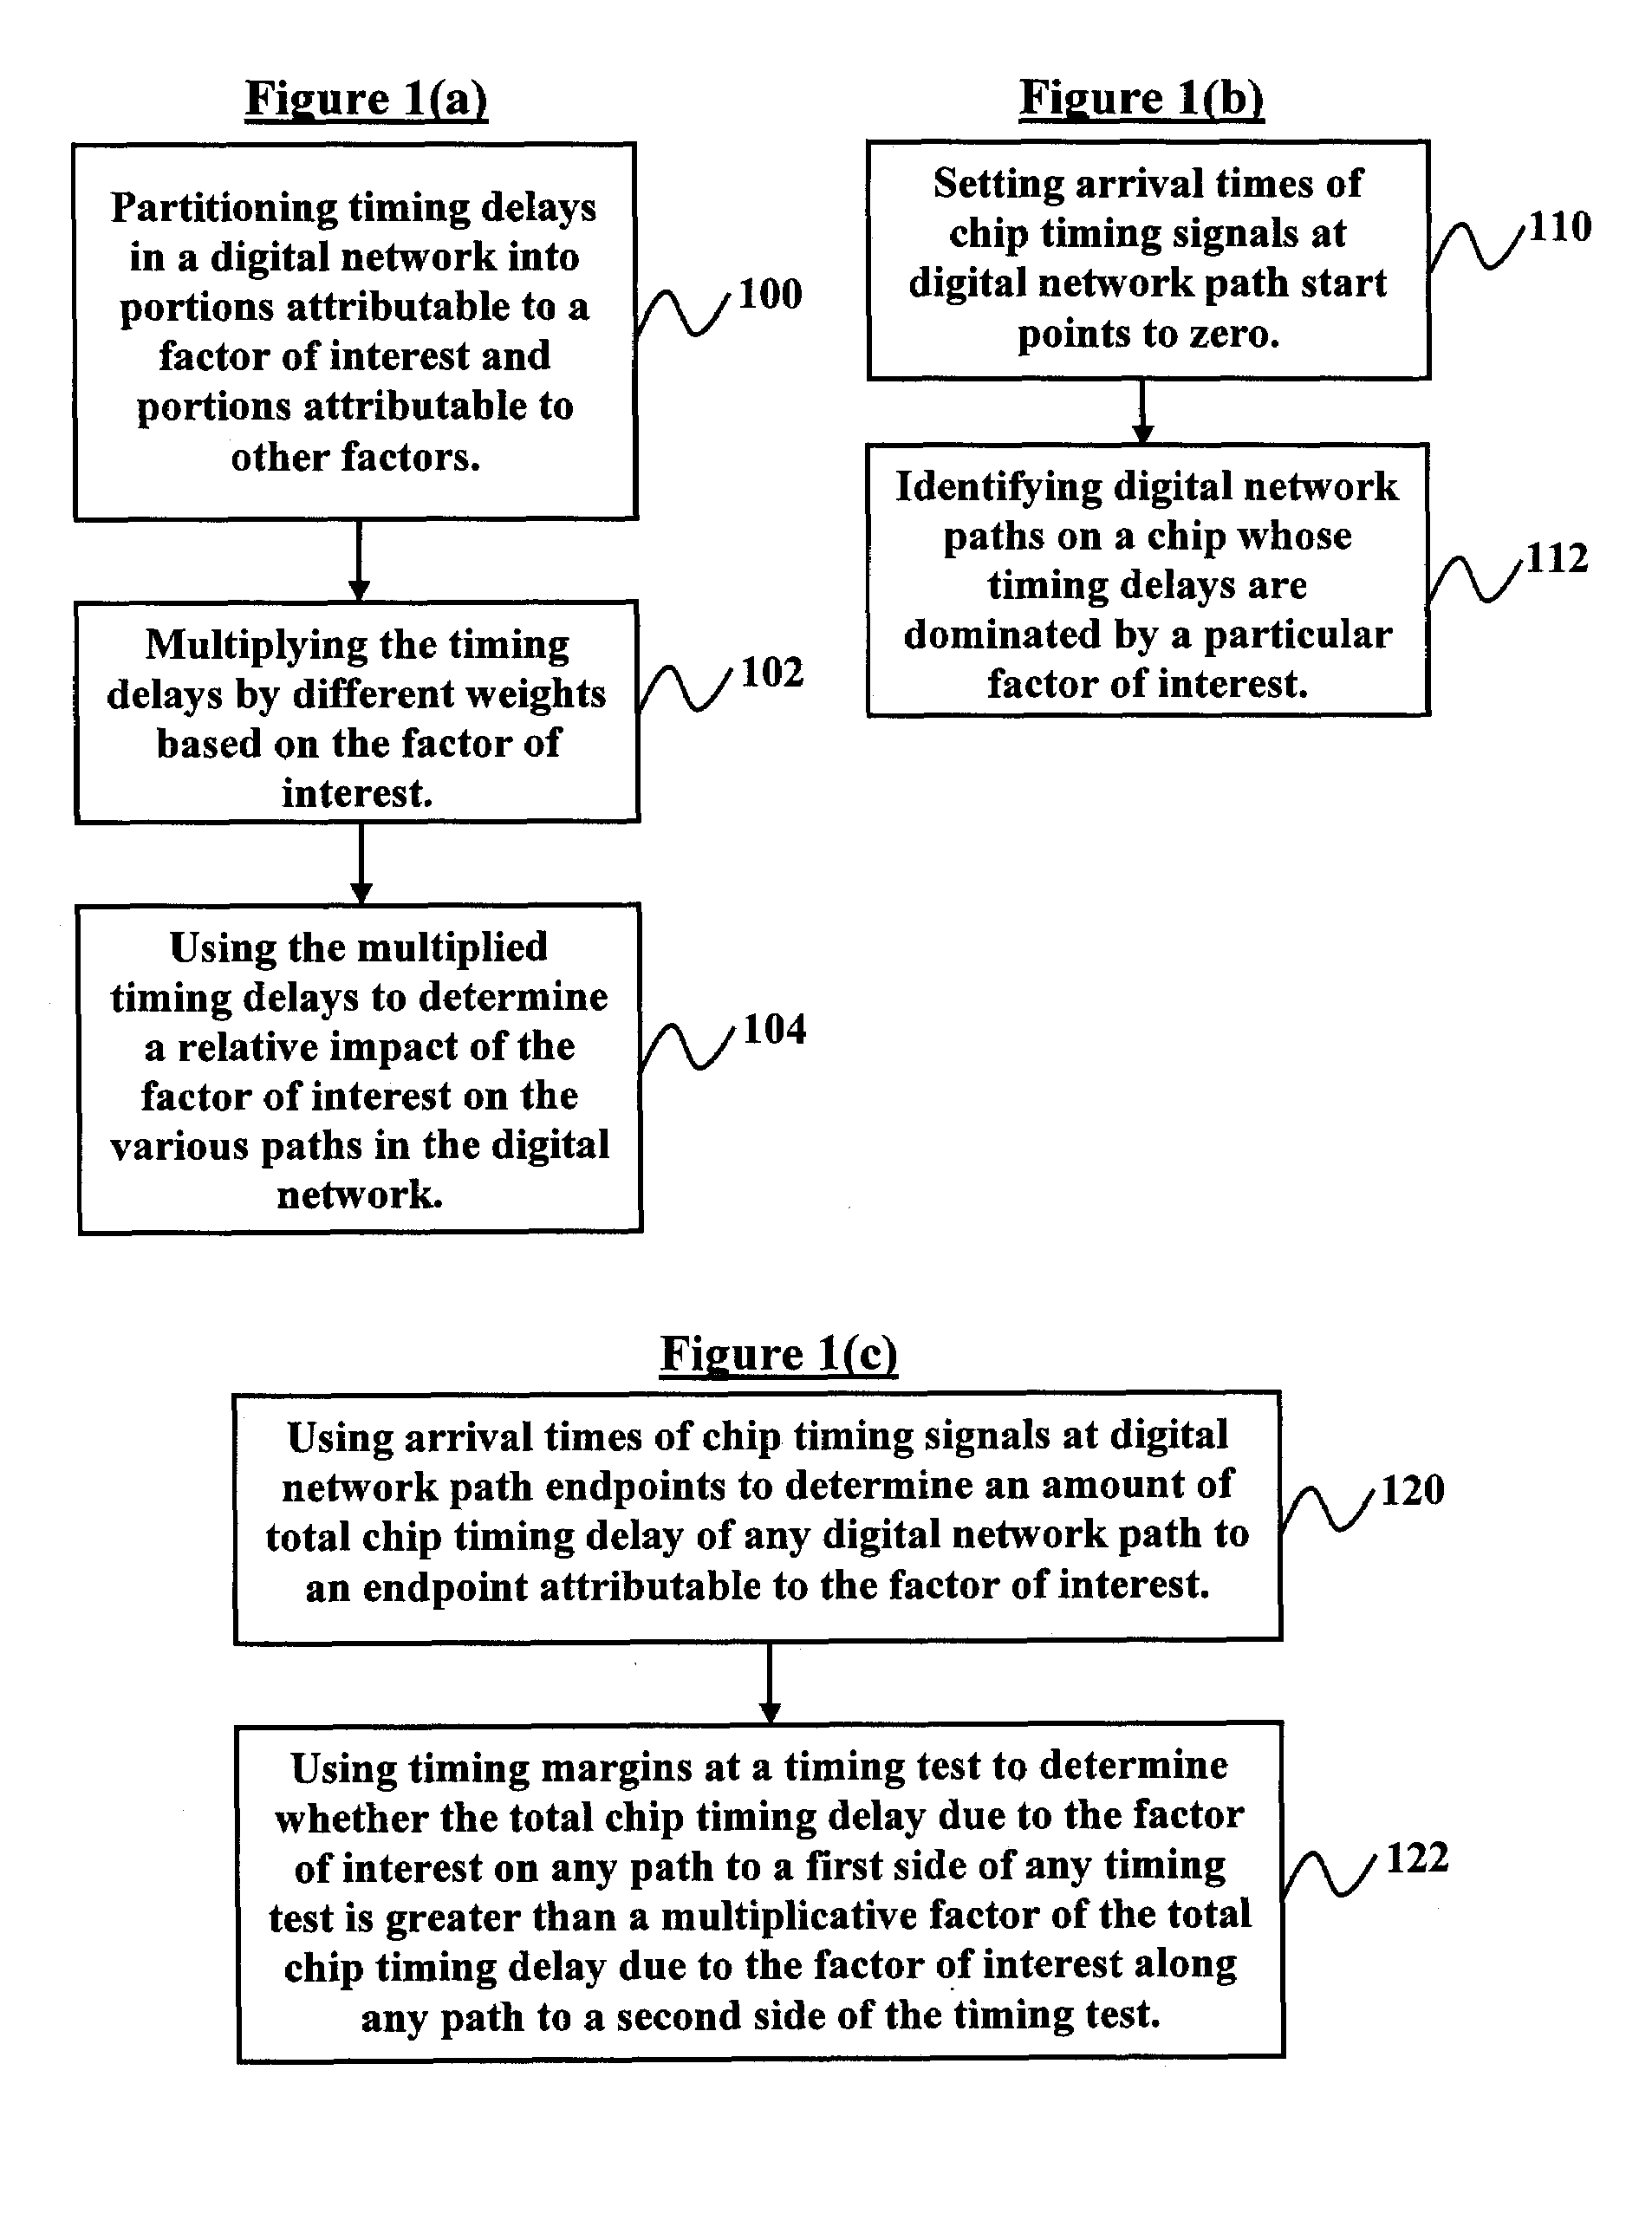 Method of identifying paths with delays dominated by a particular factor